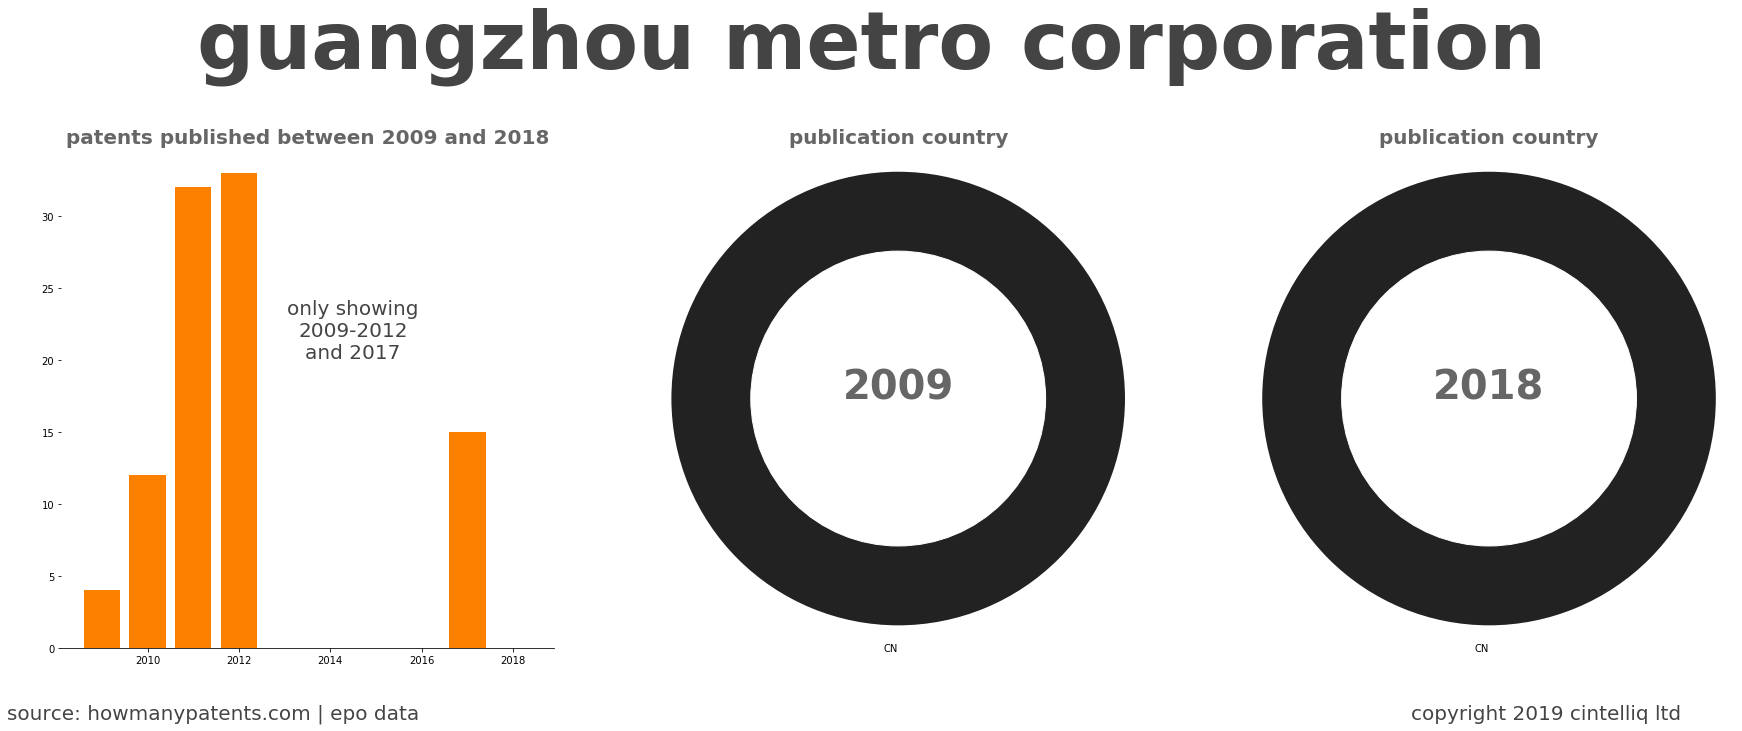 summary of patents for Guangzhou Metro Corporation